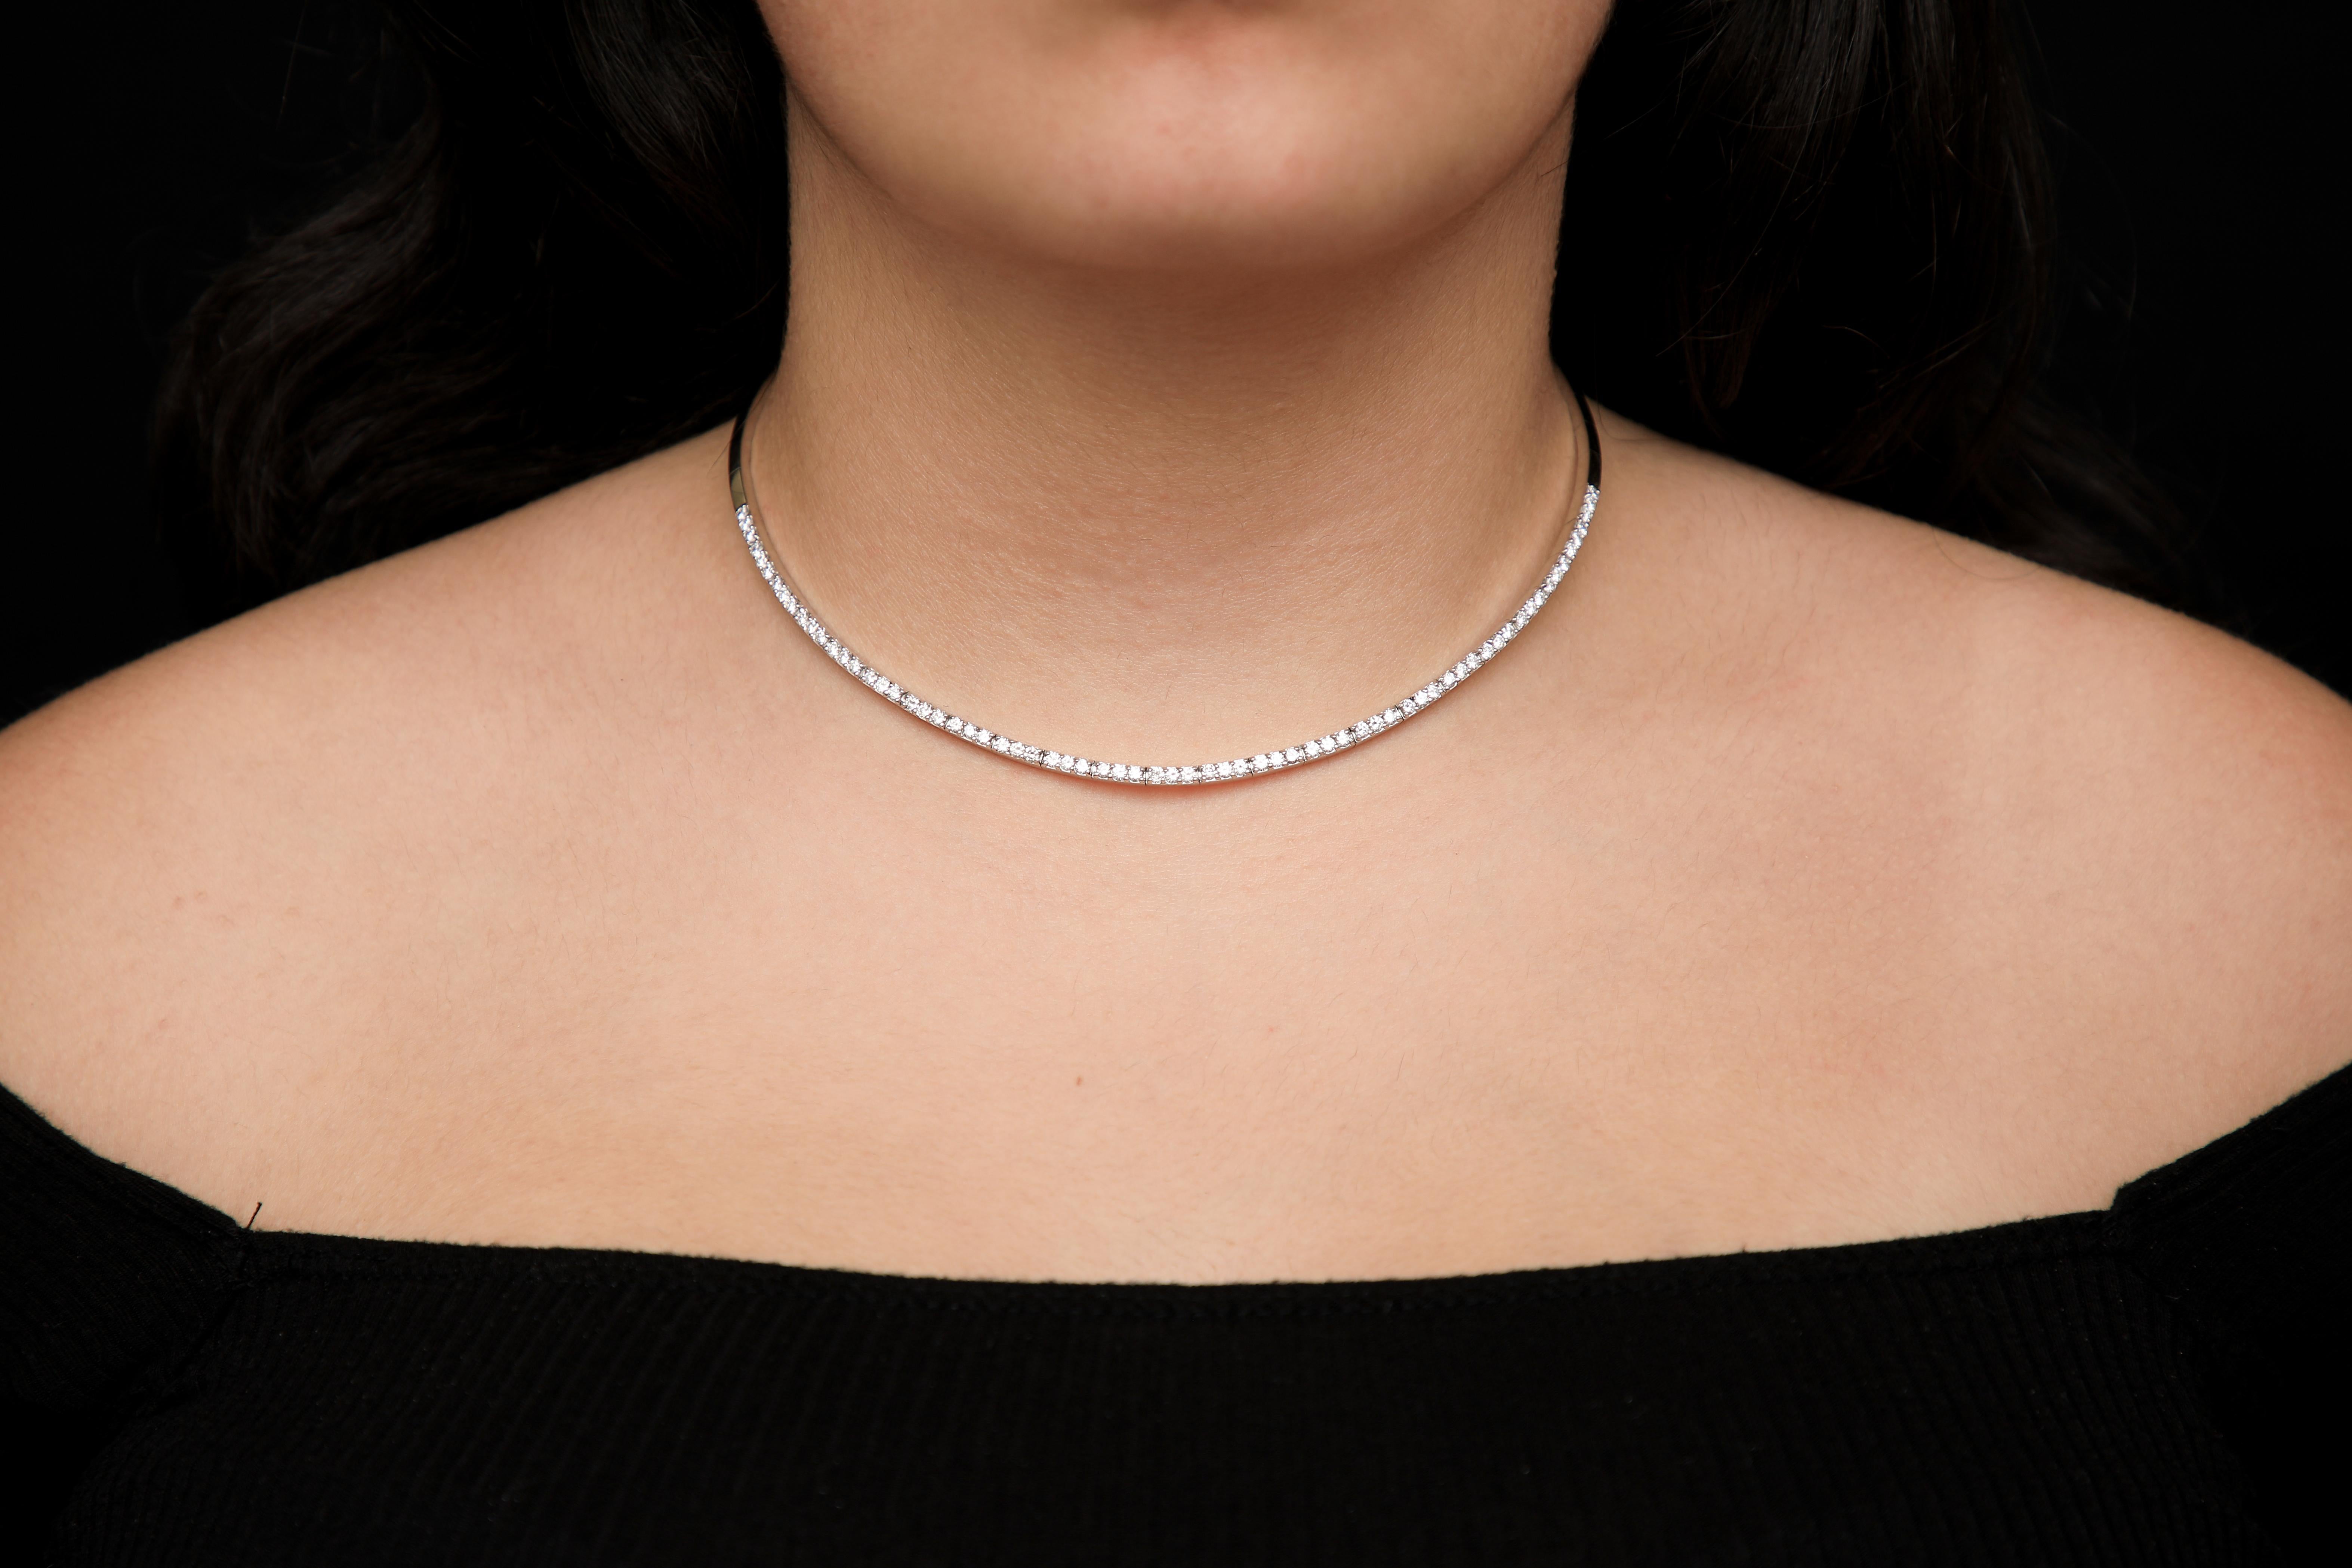 Diamond 4.01 Carat Rivière Line Choker Collar Necklace

Stunning collar style diamond Riviére, line necklace comprised of solid 14k white gold equaling to 29.5 grams. The fabulous creation is all handmade with fine craftsman ship. All the little